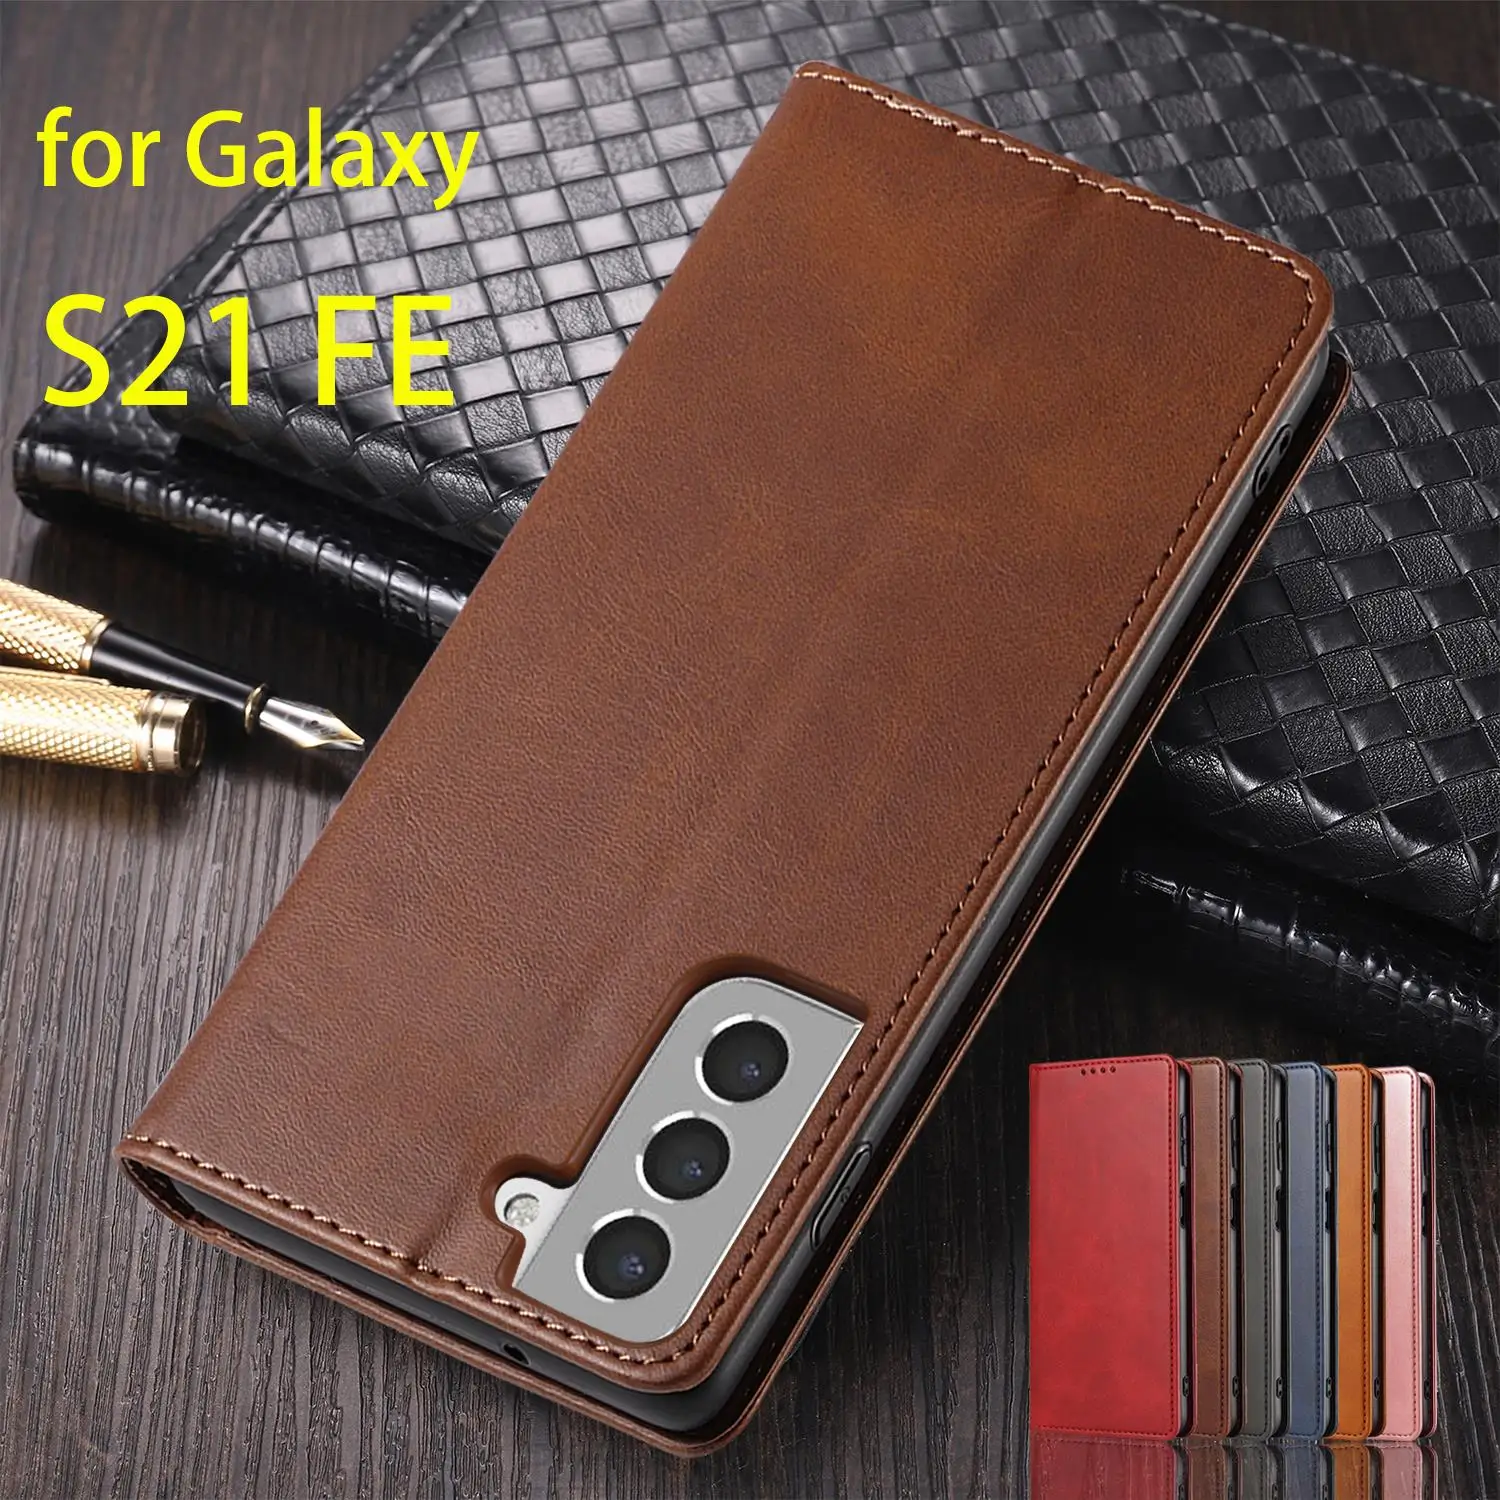 

Magnetic Attraction Cover Leather Case for Samsung Galaxy S21 FE 5G Flip Case Card Holder Wallet Case Fundas Coque